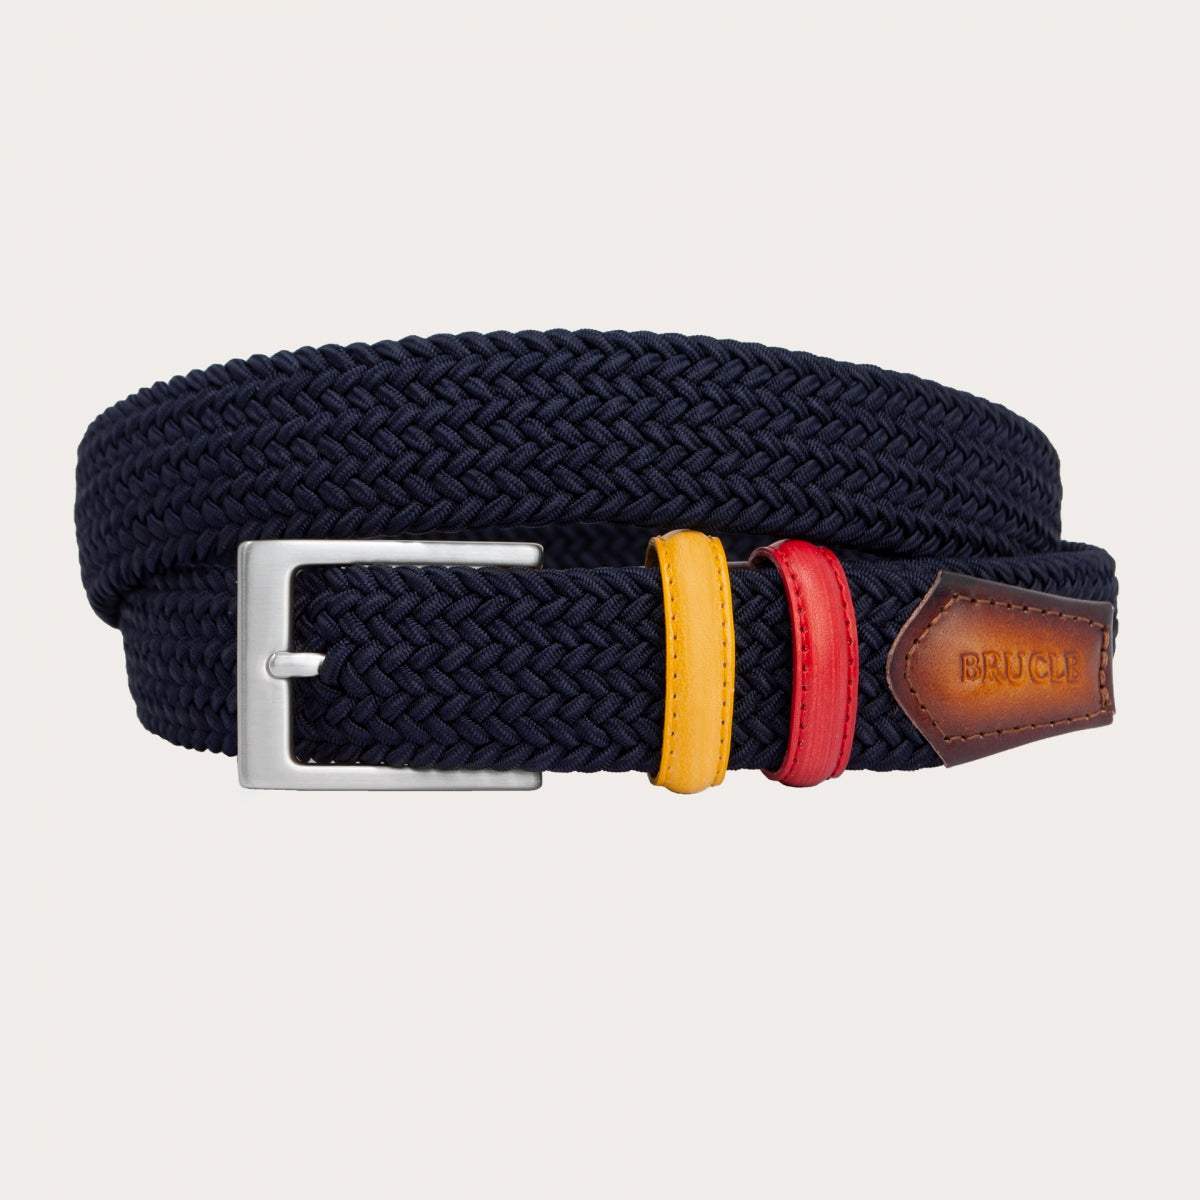 Braided nickel free elastic belt with hand-colored leather